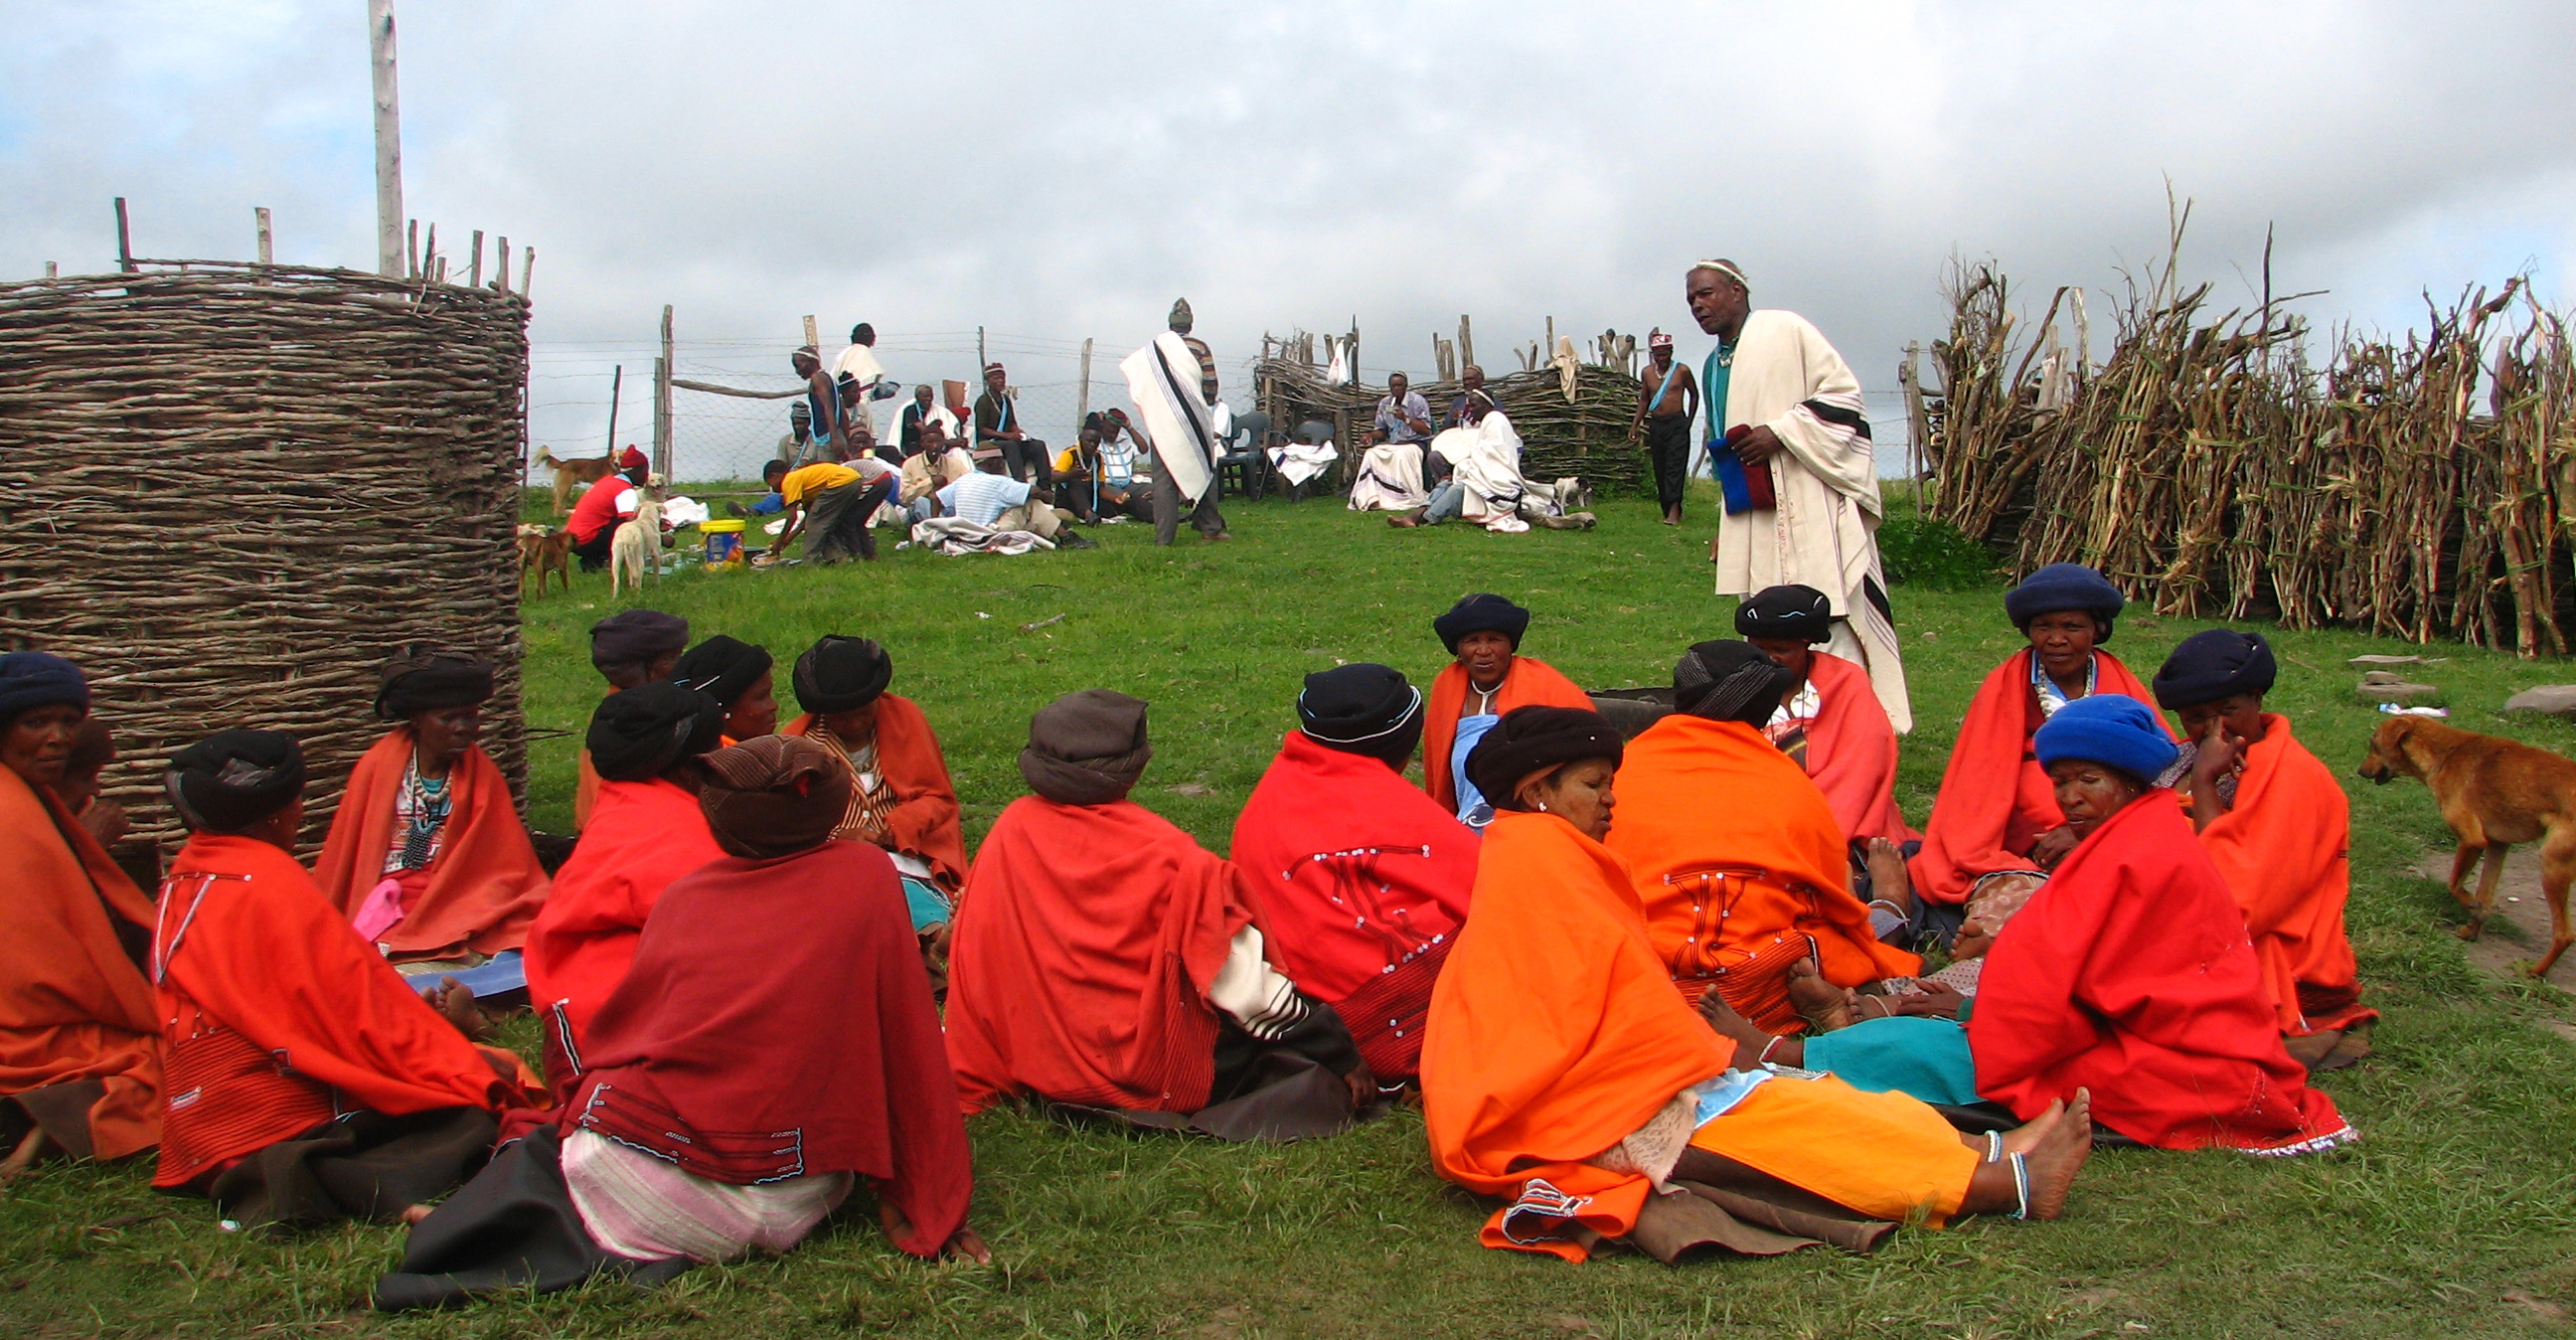 A group of Xhosa women, many of whom have returned from urban employment, wear traditional dress and await a cultural ceremony at the homestead’s focal point: the kraal. Photo: V. Masterson